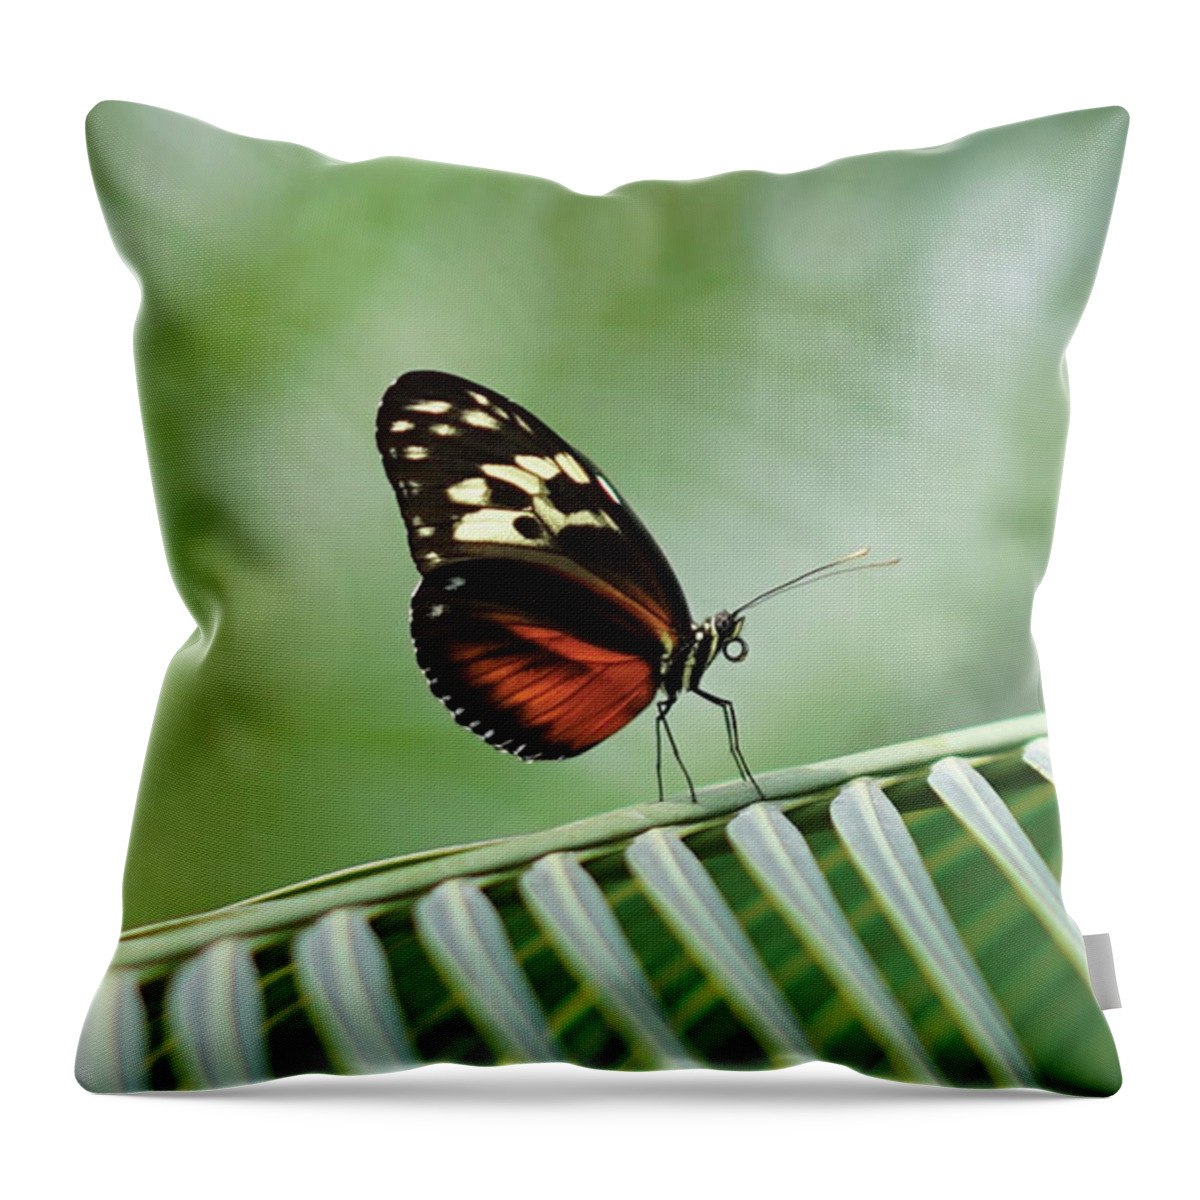 Butterfly Throw Pillow featuring the photograph Peaceful Beauty by Christine Chin-Fook